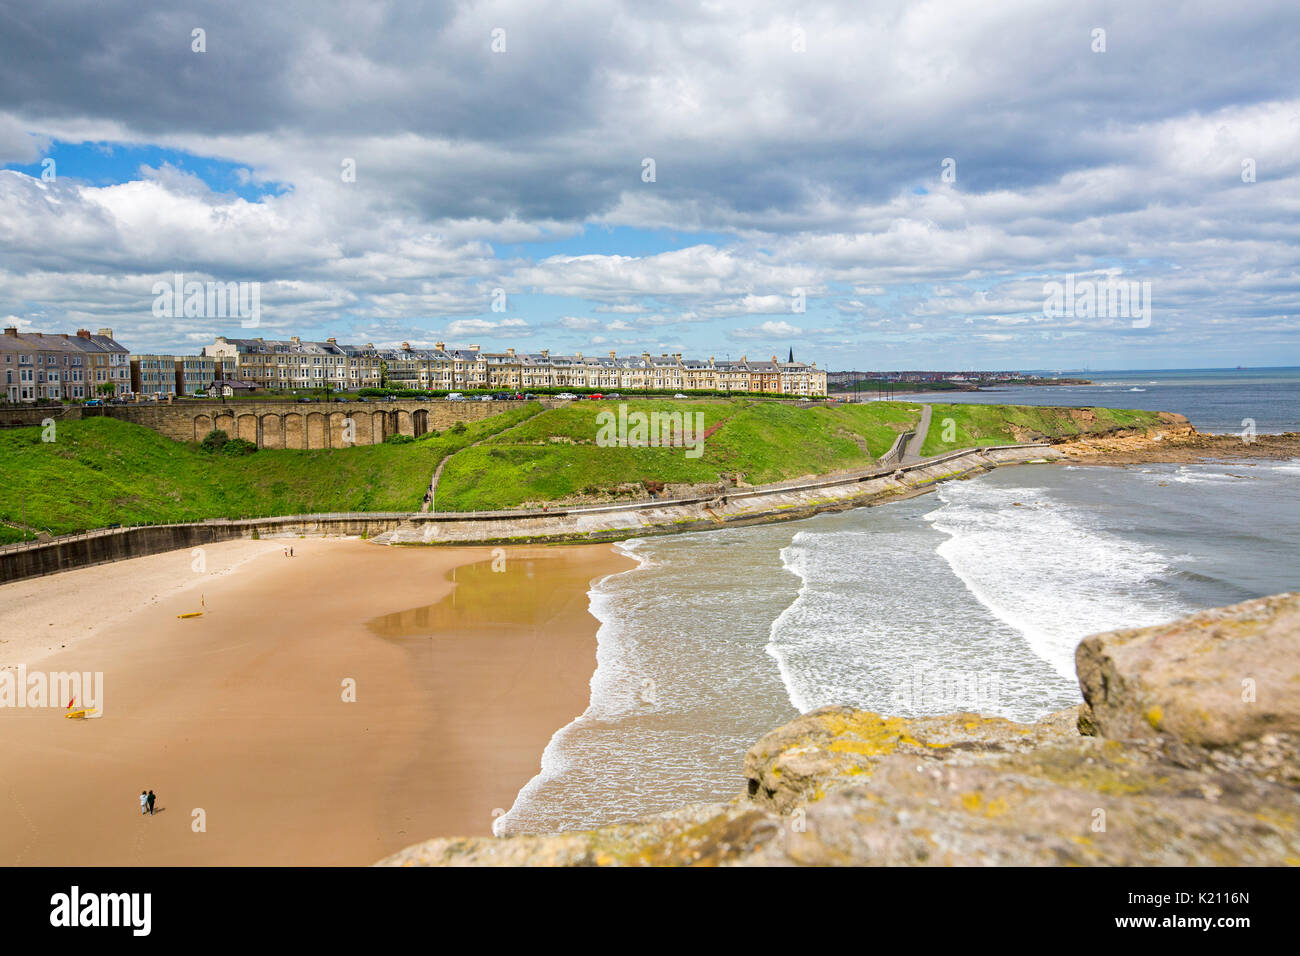 Buildings and guesthouses at Tynemouth on clifftop towering above sandy beach and ocean under blue sky, viewed from ruins of historic  castle, England Stock Photo